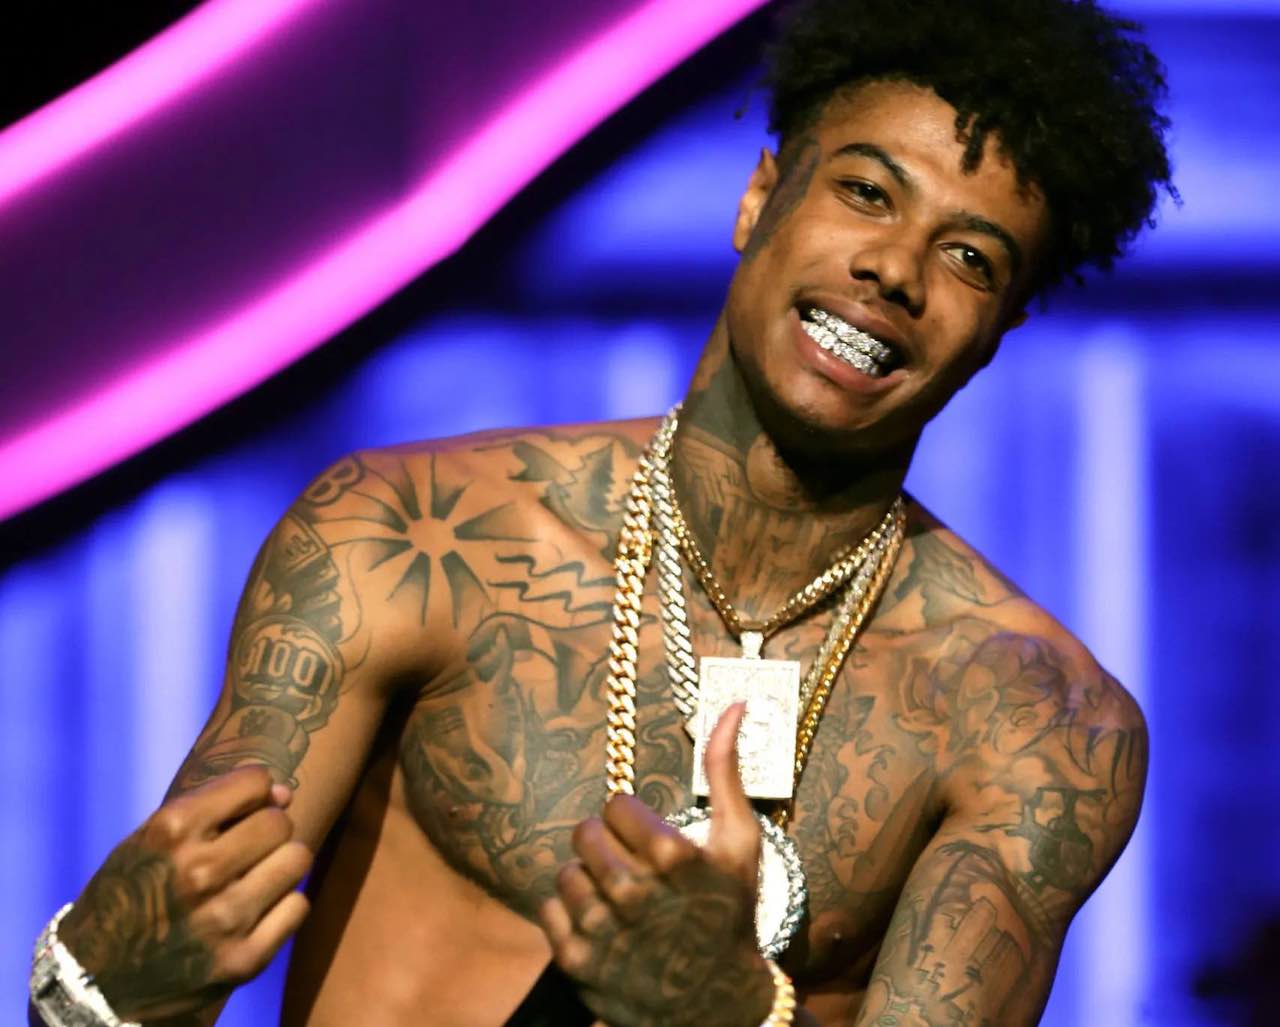 Blueface turned the rap fight stage to a payday, boosting his net worth sky-high. Witness the business side of hip hop fights and how controversy becomes cash!